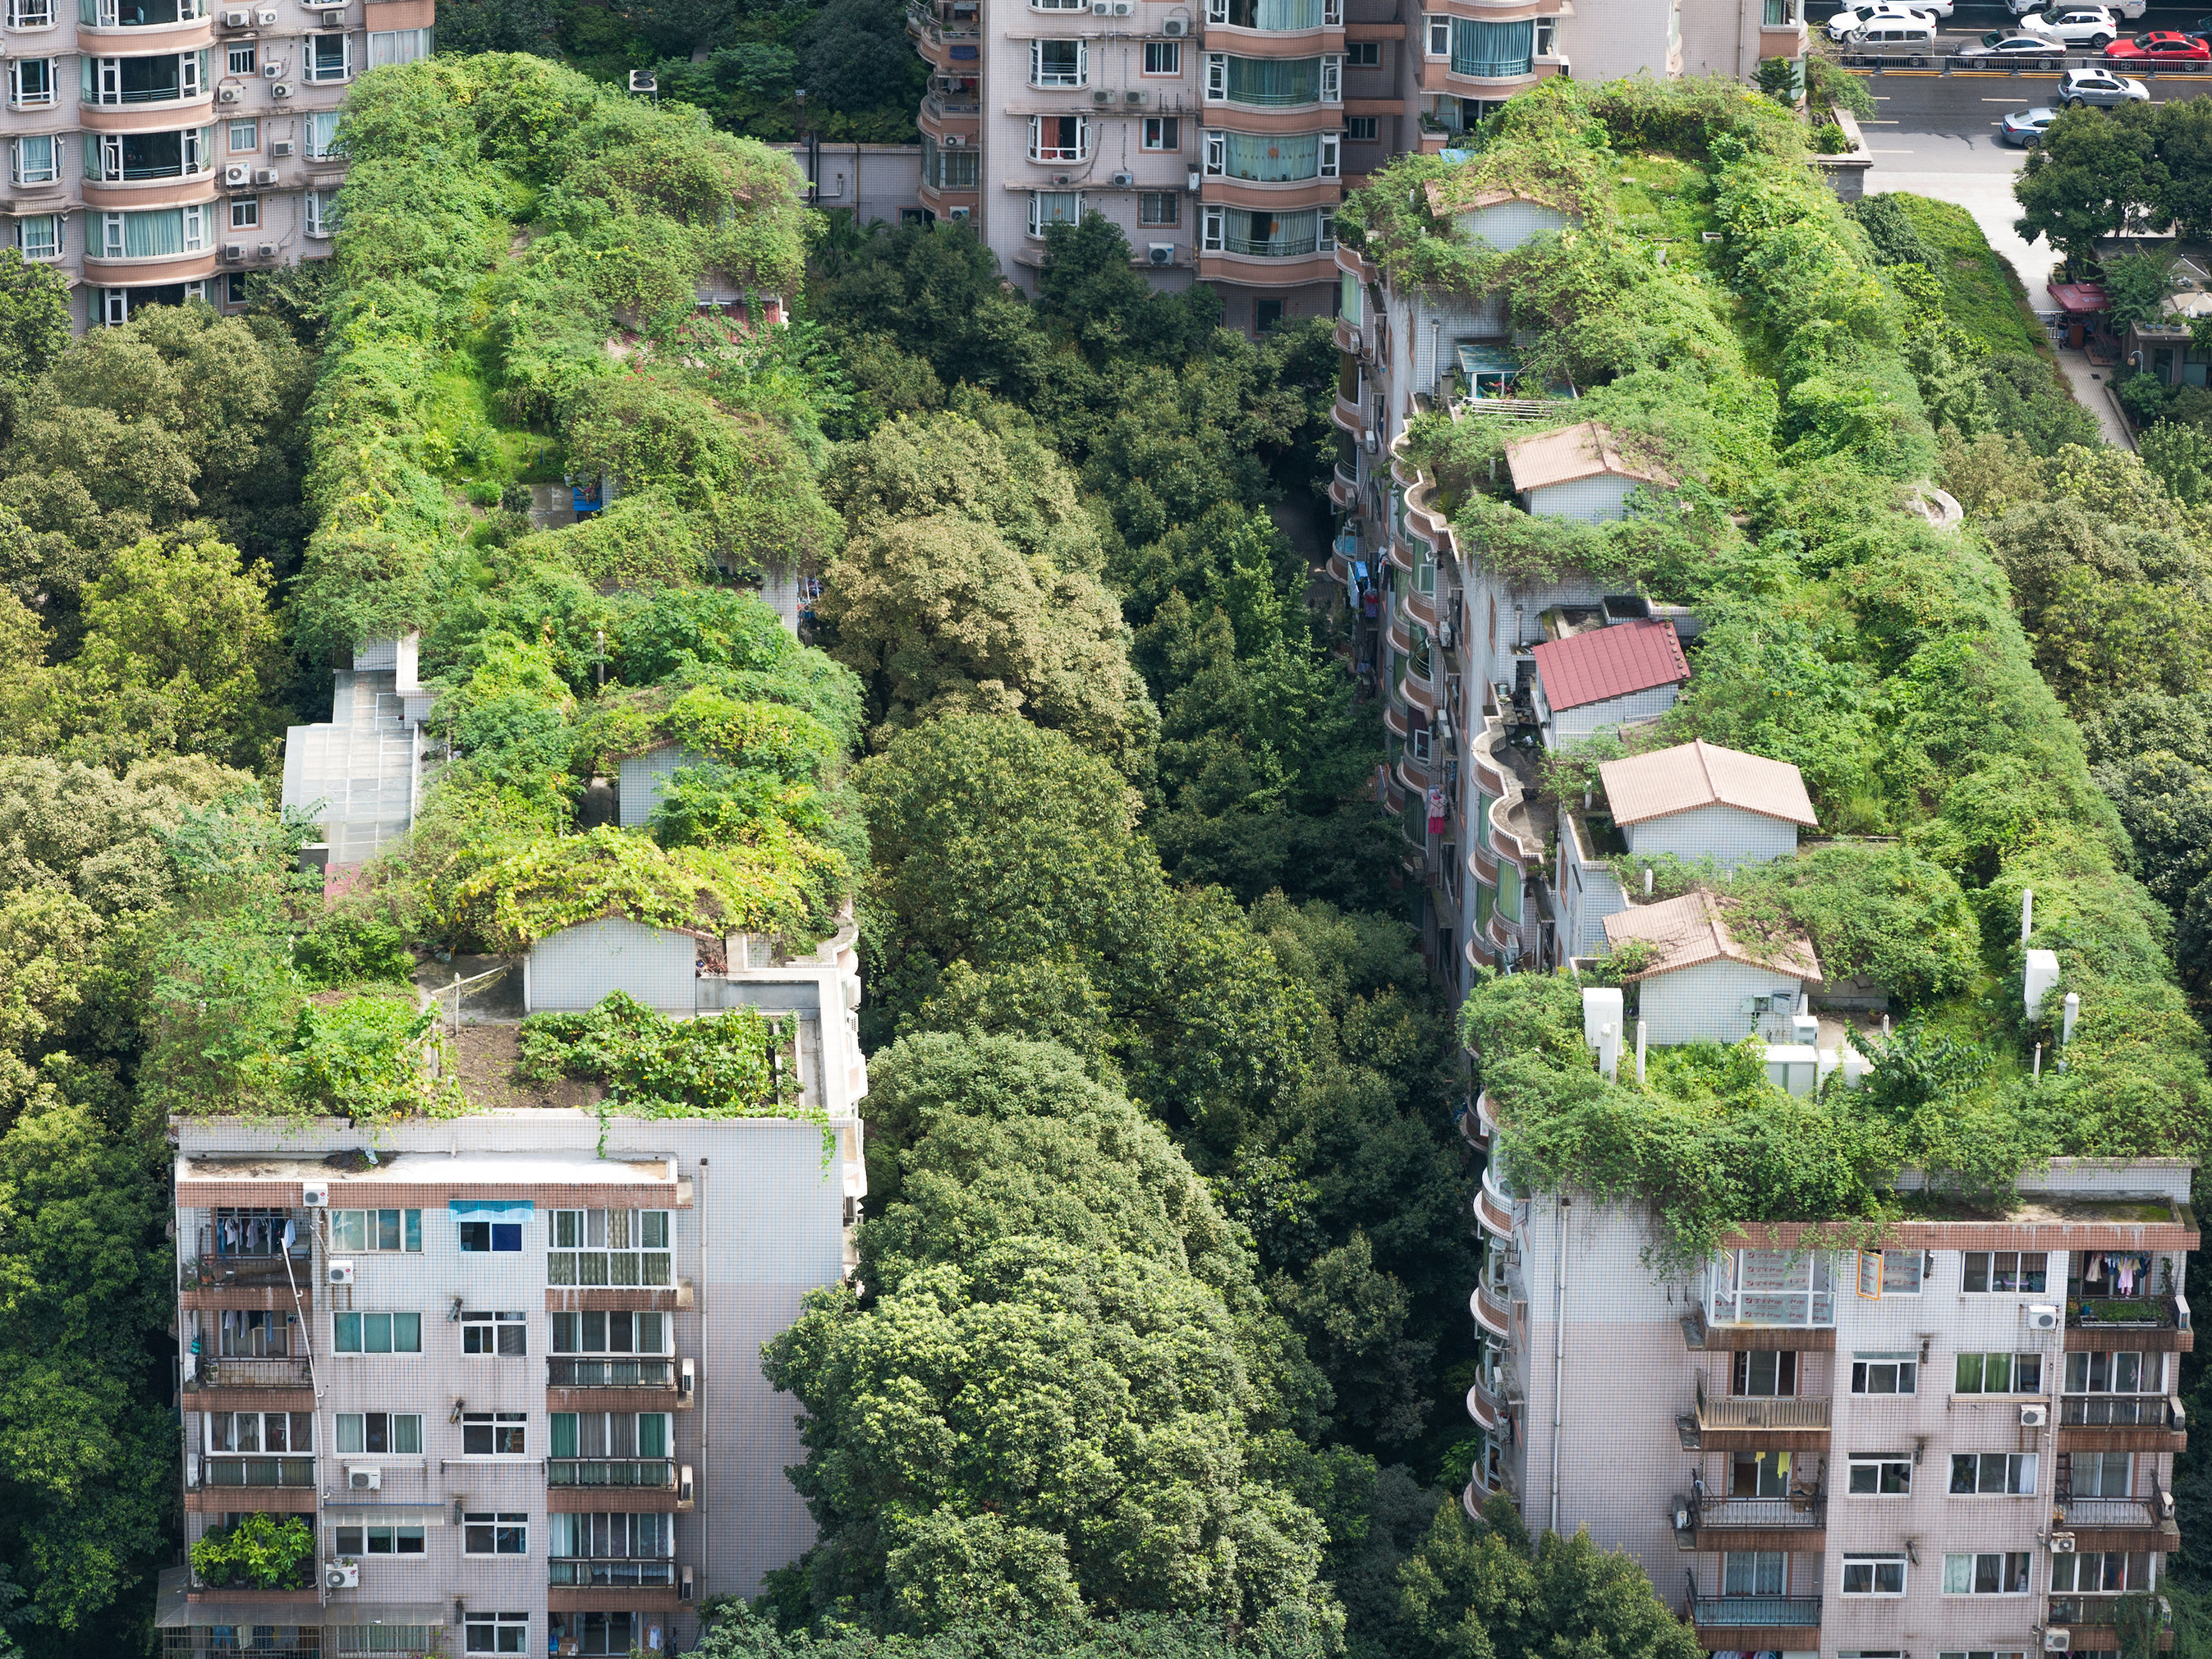 Garden roofs (like these in Chengdu, in China&rsquo;s Sichuan province) need maintenance and community involvement. Image: shutterstock.com
